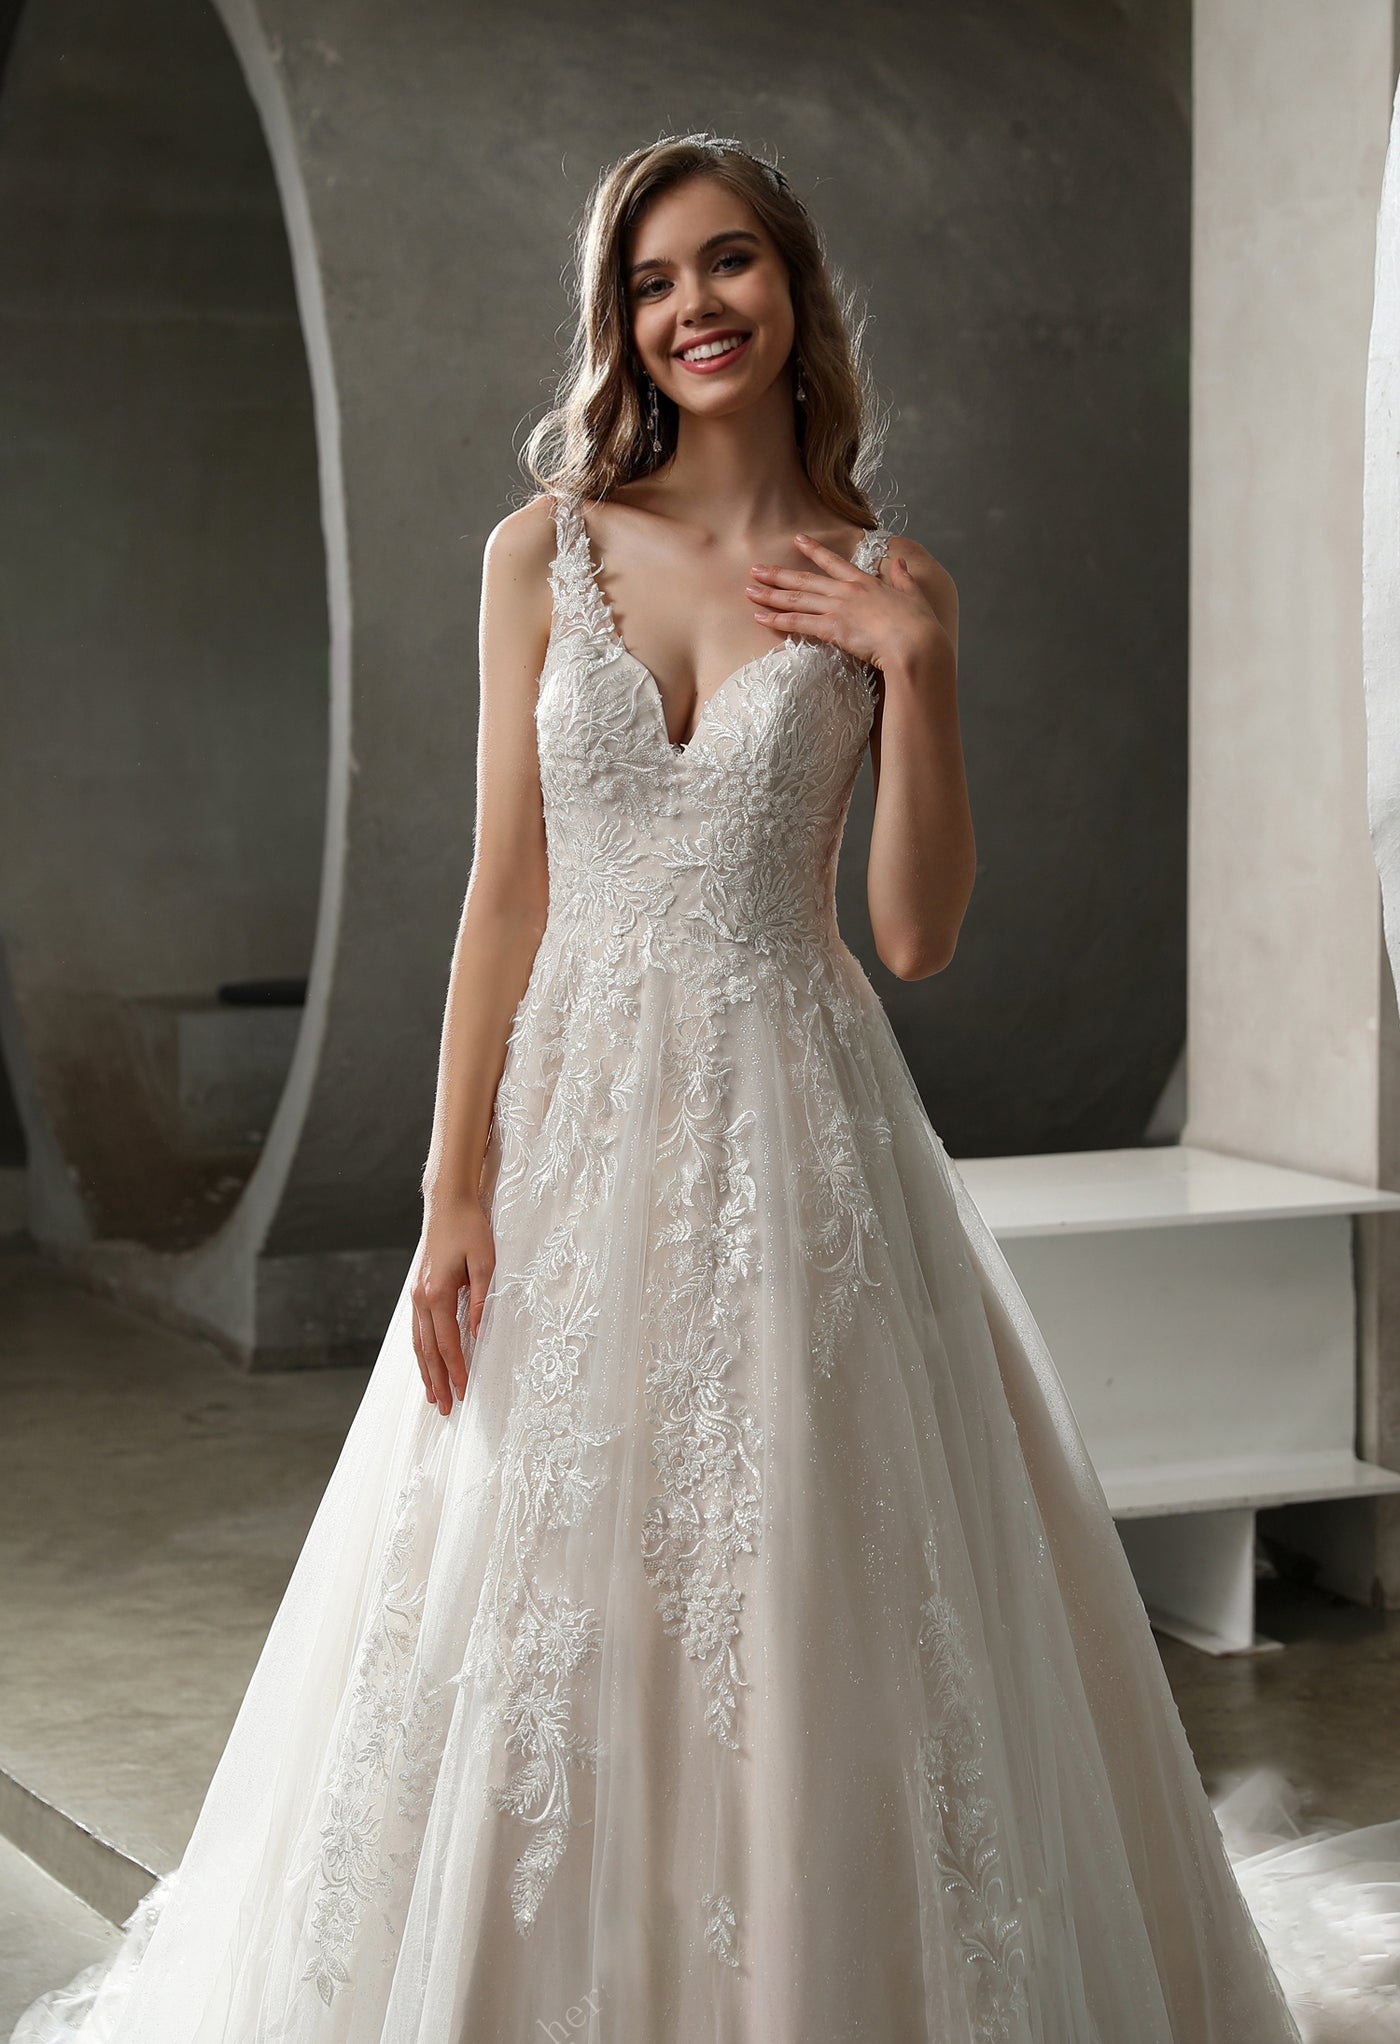 Stunning Tulle Lace Ball Gown with Glitter Tulle Underlay